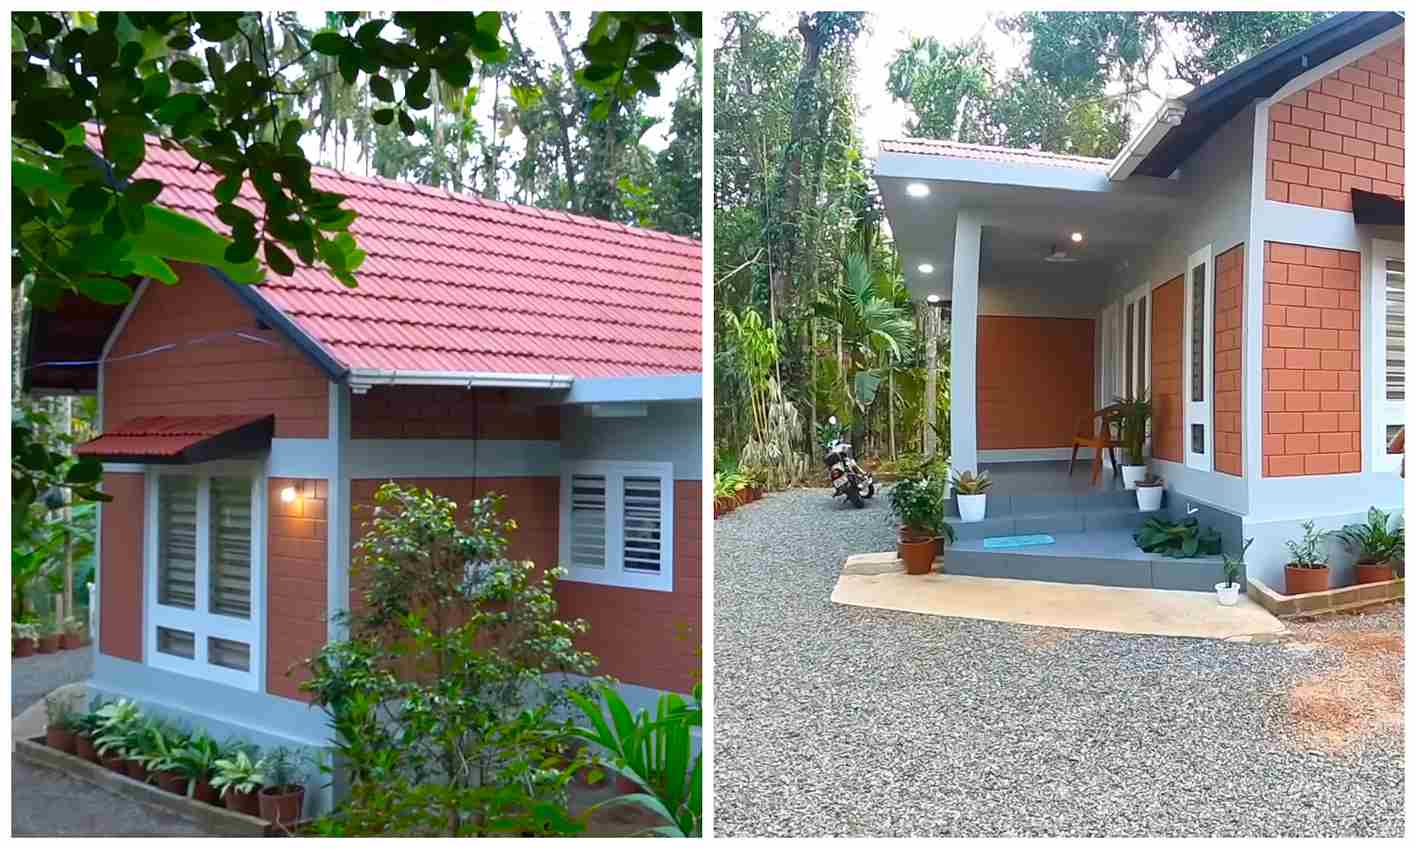 9 Lakh Rupees Budget Home